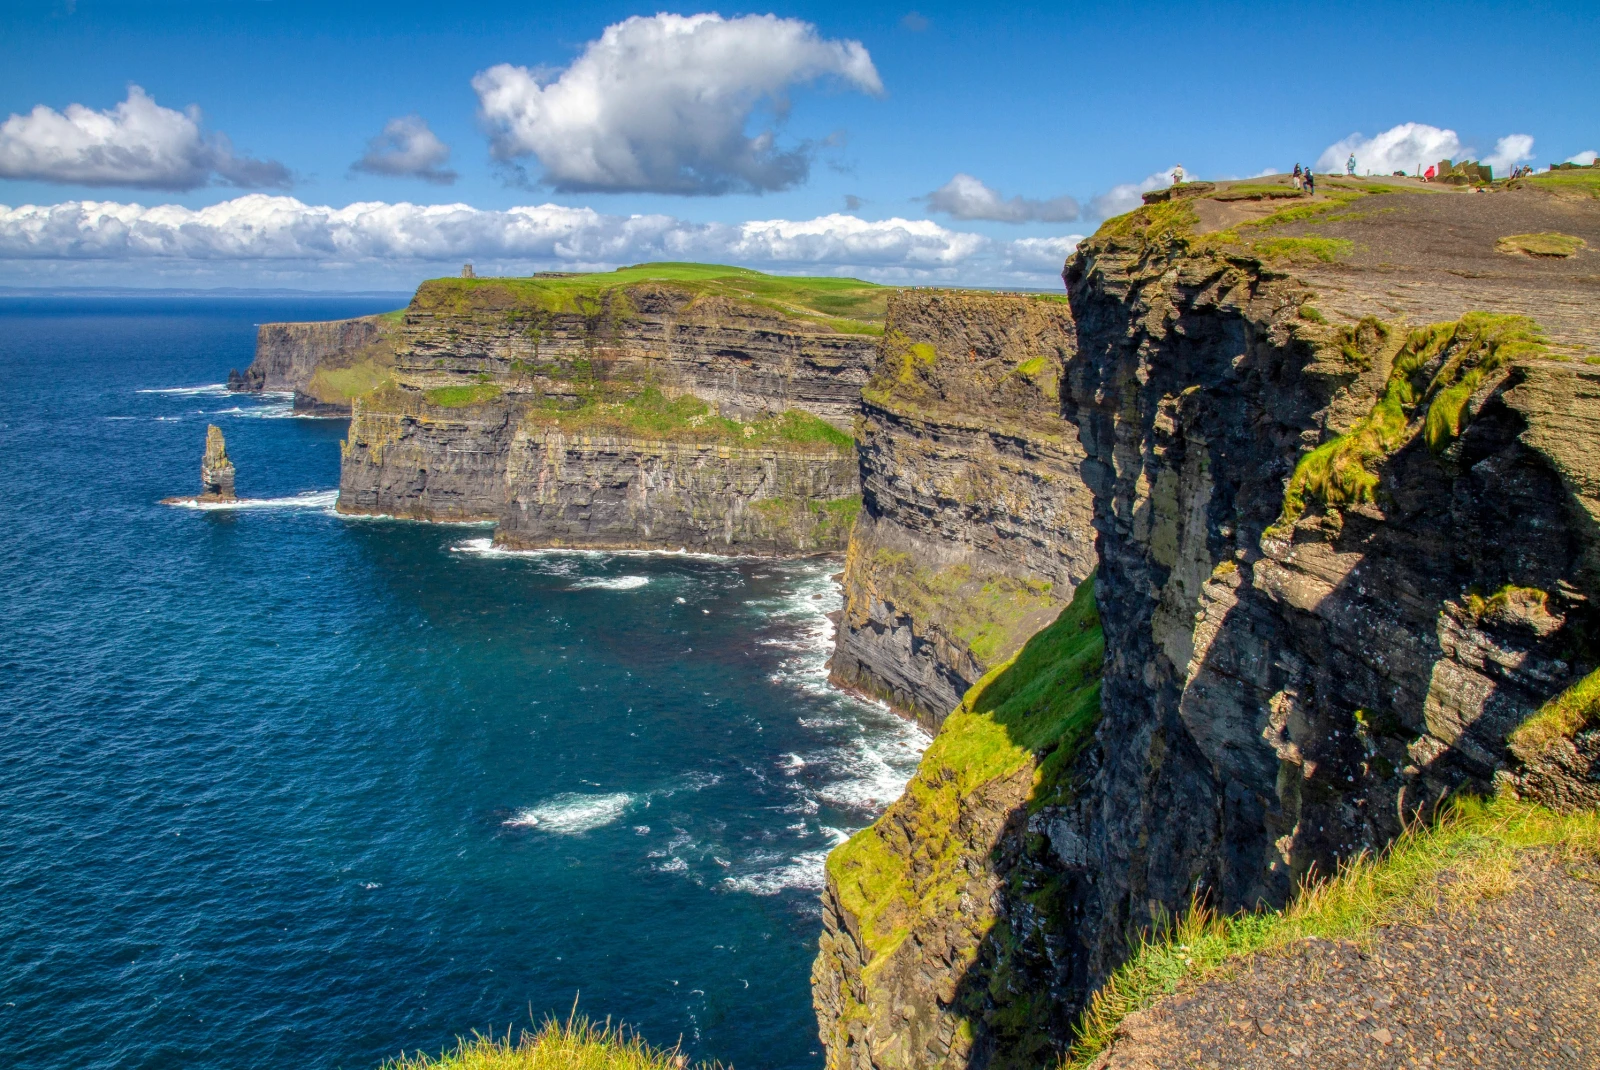 The Cliffs of Moher in Ireland are nature's towering masterpiece, offering awe-inspiring coastal vistas that blend dramatic cliffs with the wild beauty of the Atlantic Ocean.